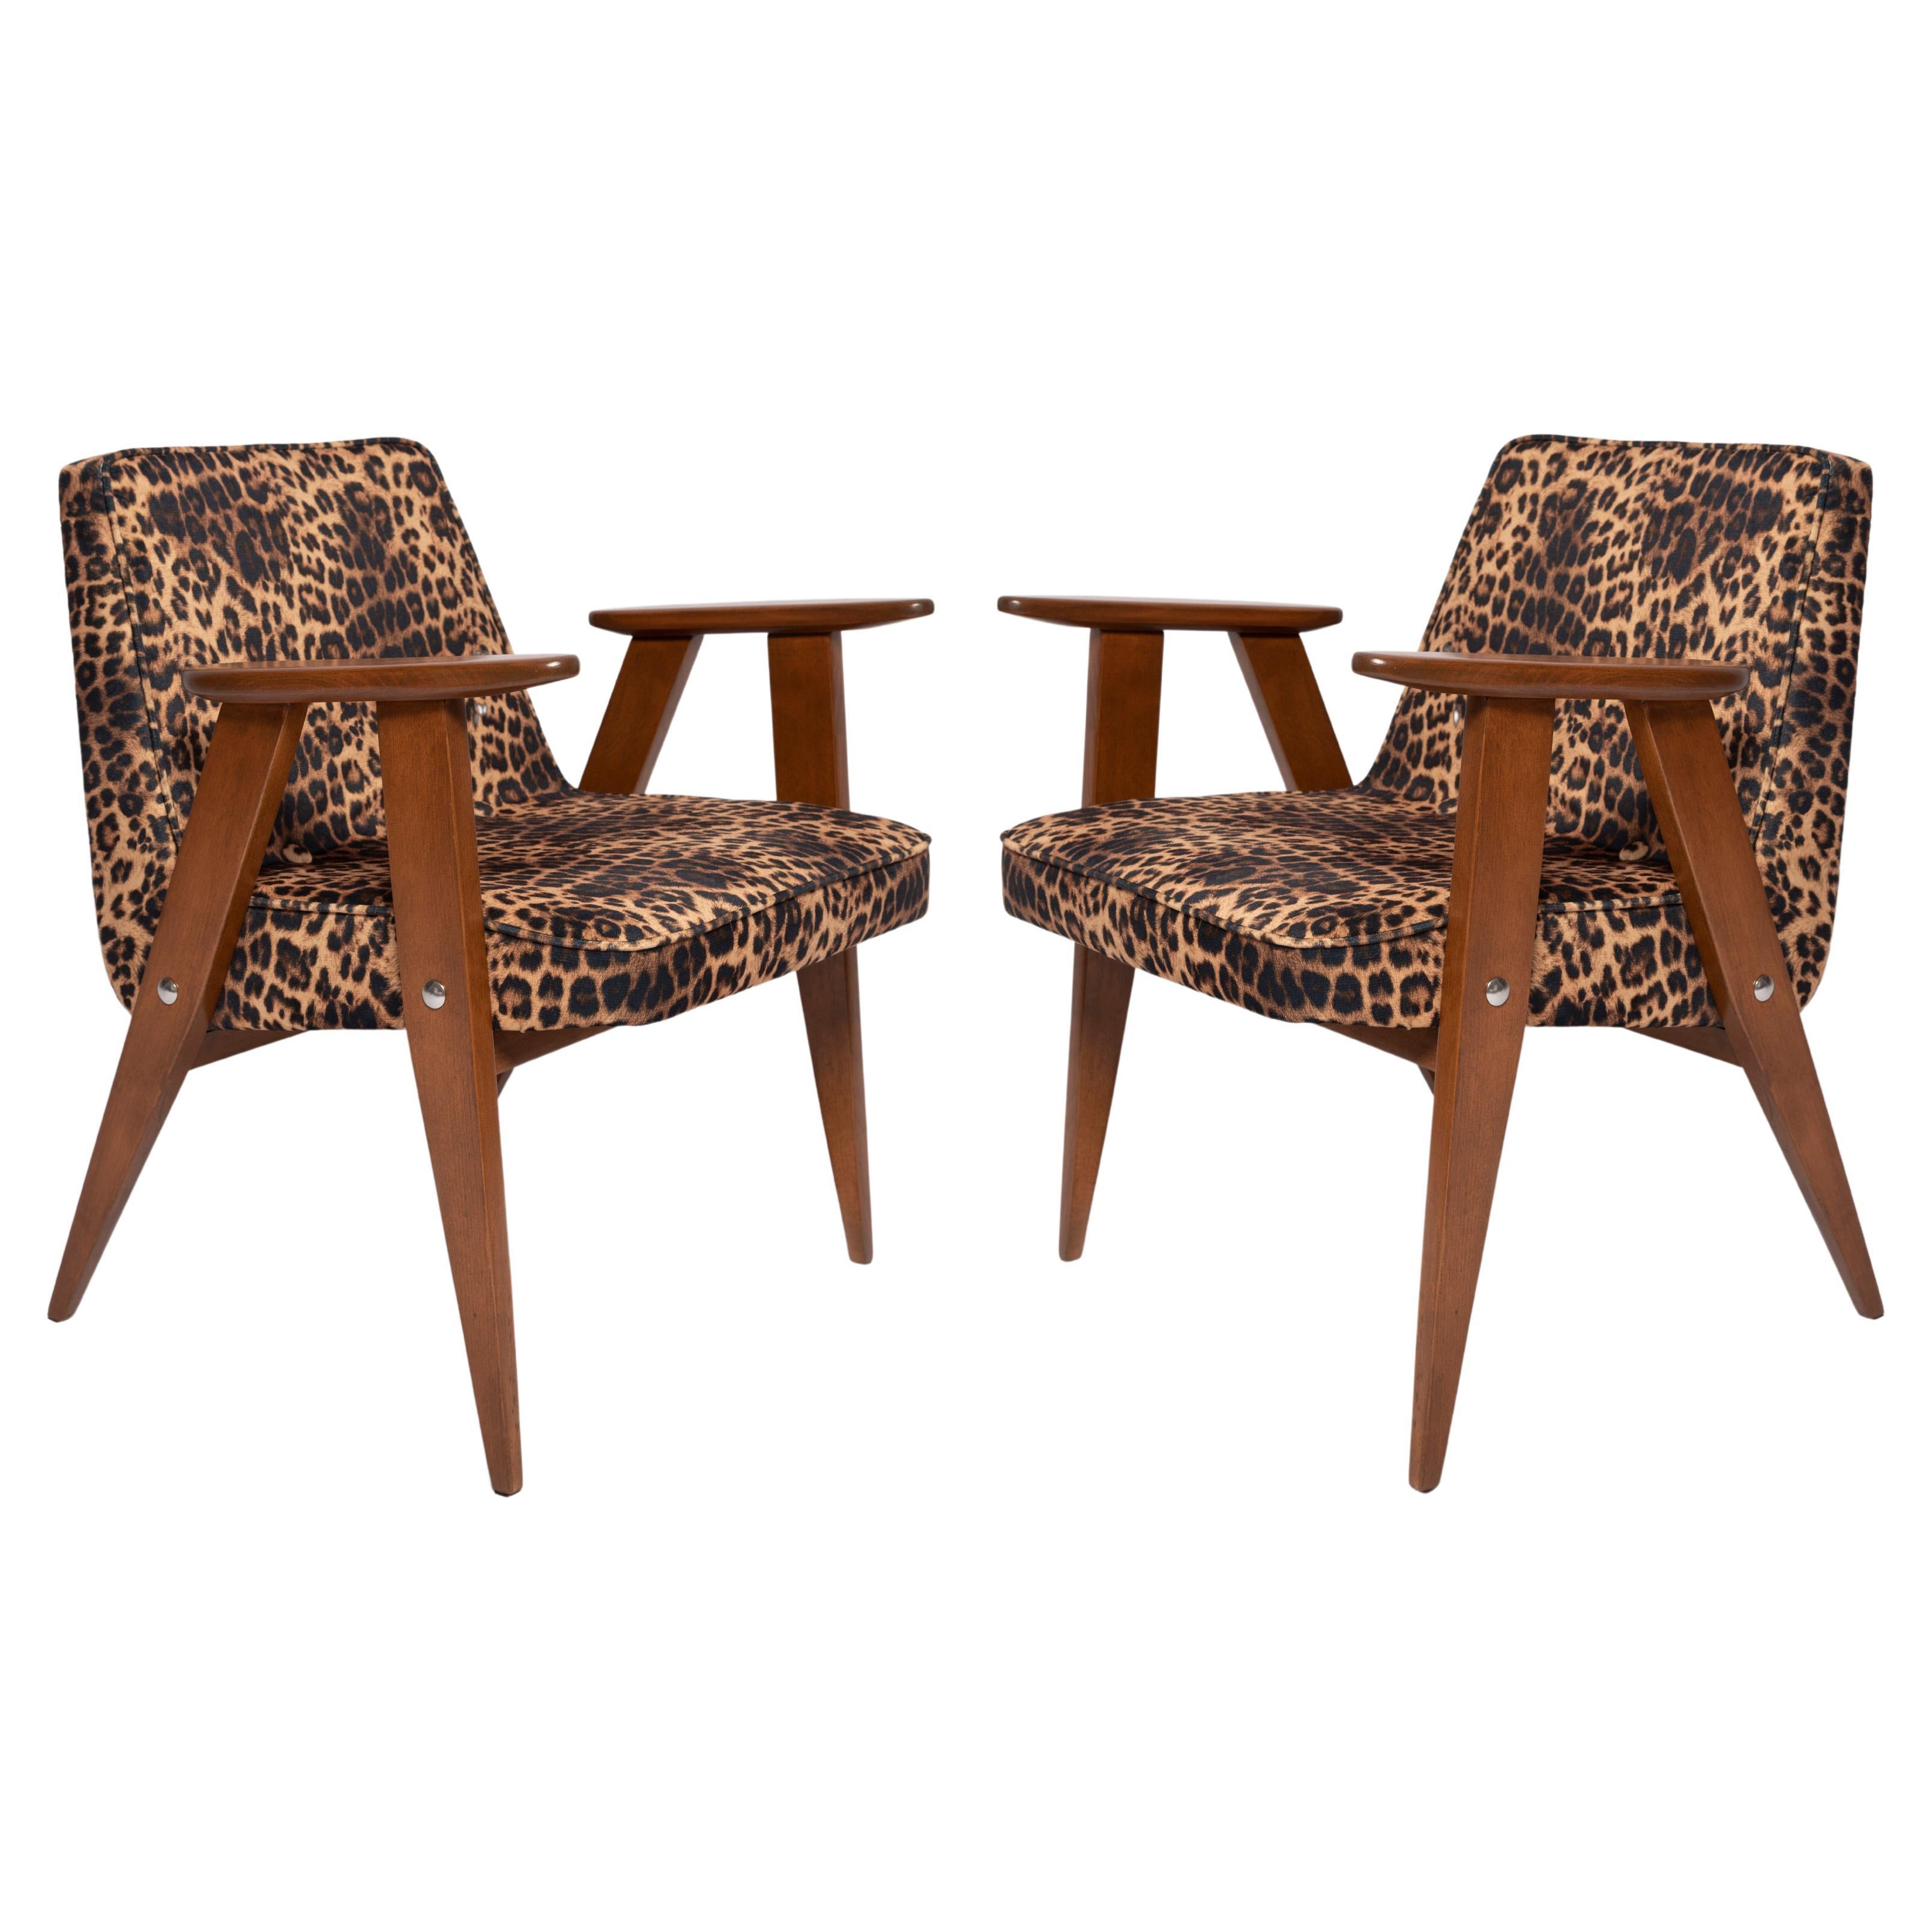 Two Mid Century 366 Armchairs in Leopard Print Velvet, Jozef Chierowski, 1960s For Sale